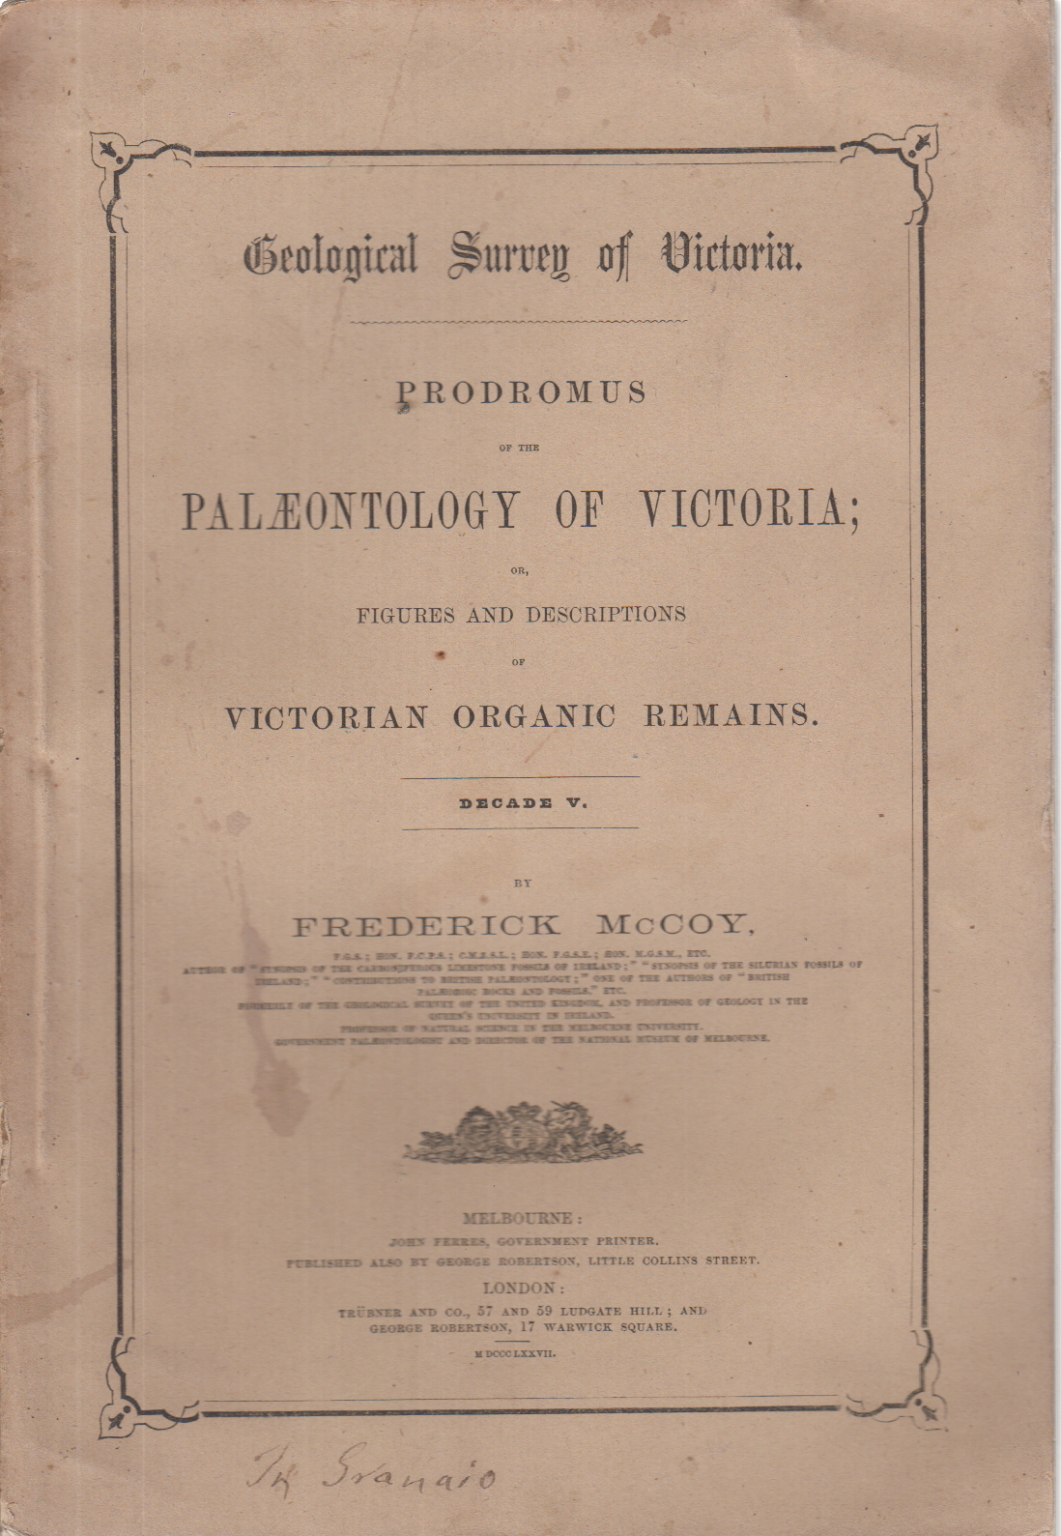 Geological Survey of Victoria. Prodromus of the Pa, Frederick McCoy